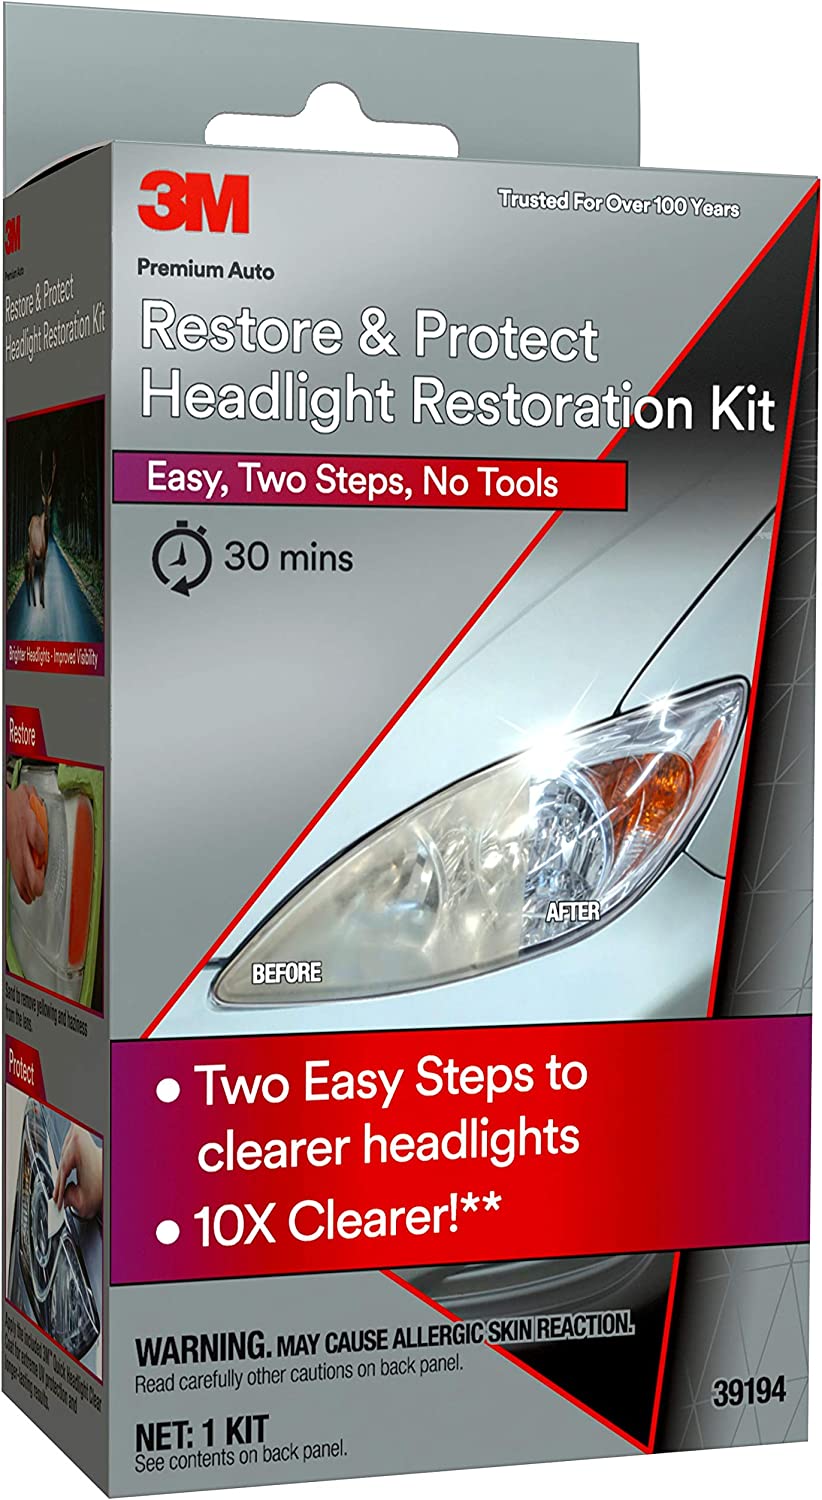 3M Auto Restore and Protect Headlight Restoration Kit, Clearer Headlights in 2 Easy Steps